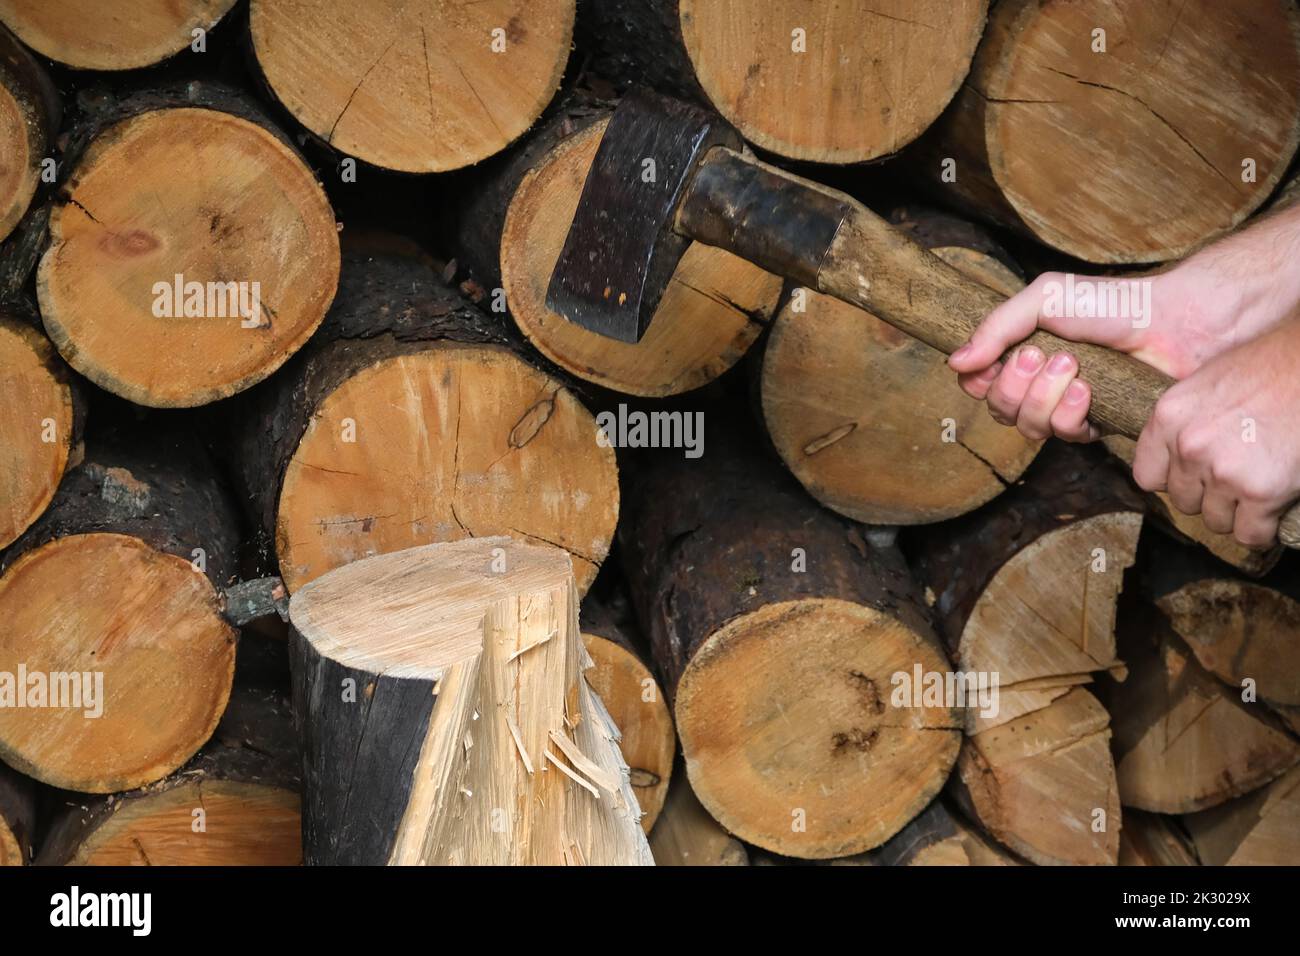 A man is chopping logs with an axe on chopping block. Harvesting of firewood stocks for heating. An alternative source of thermal energy instead of natural gas. Stock Photo